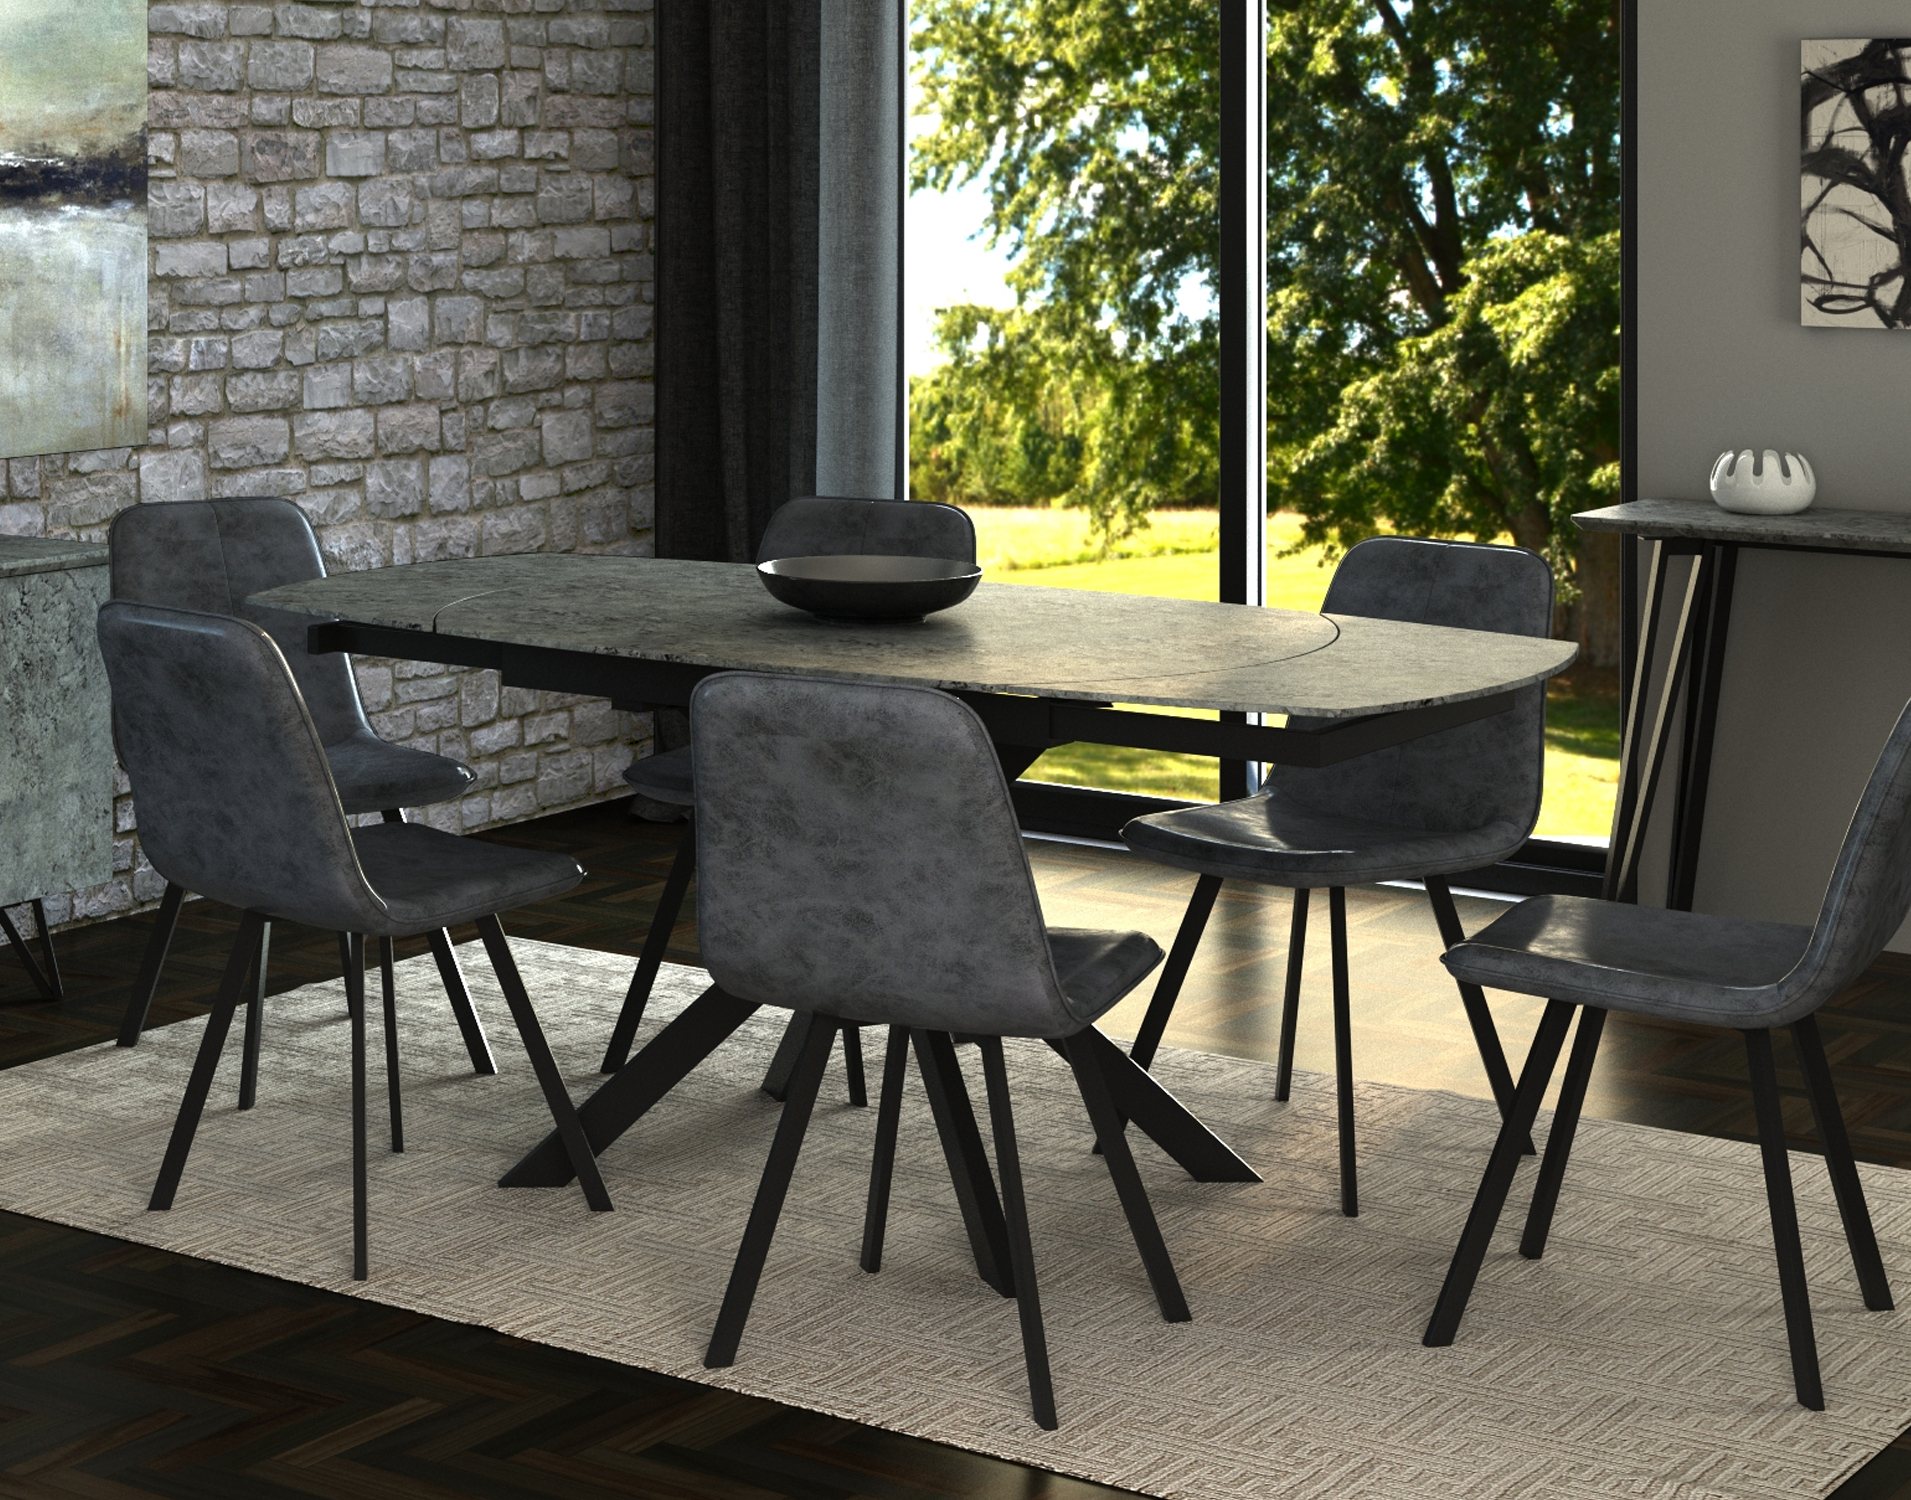 Titan Motion Dining Table Set 4 Grey, Grey Dining Room Chairs Set Of 4